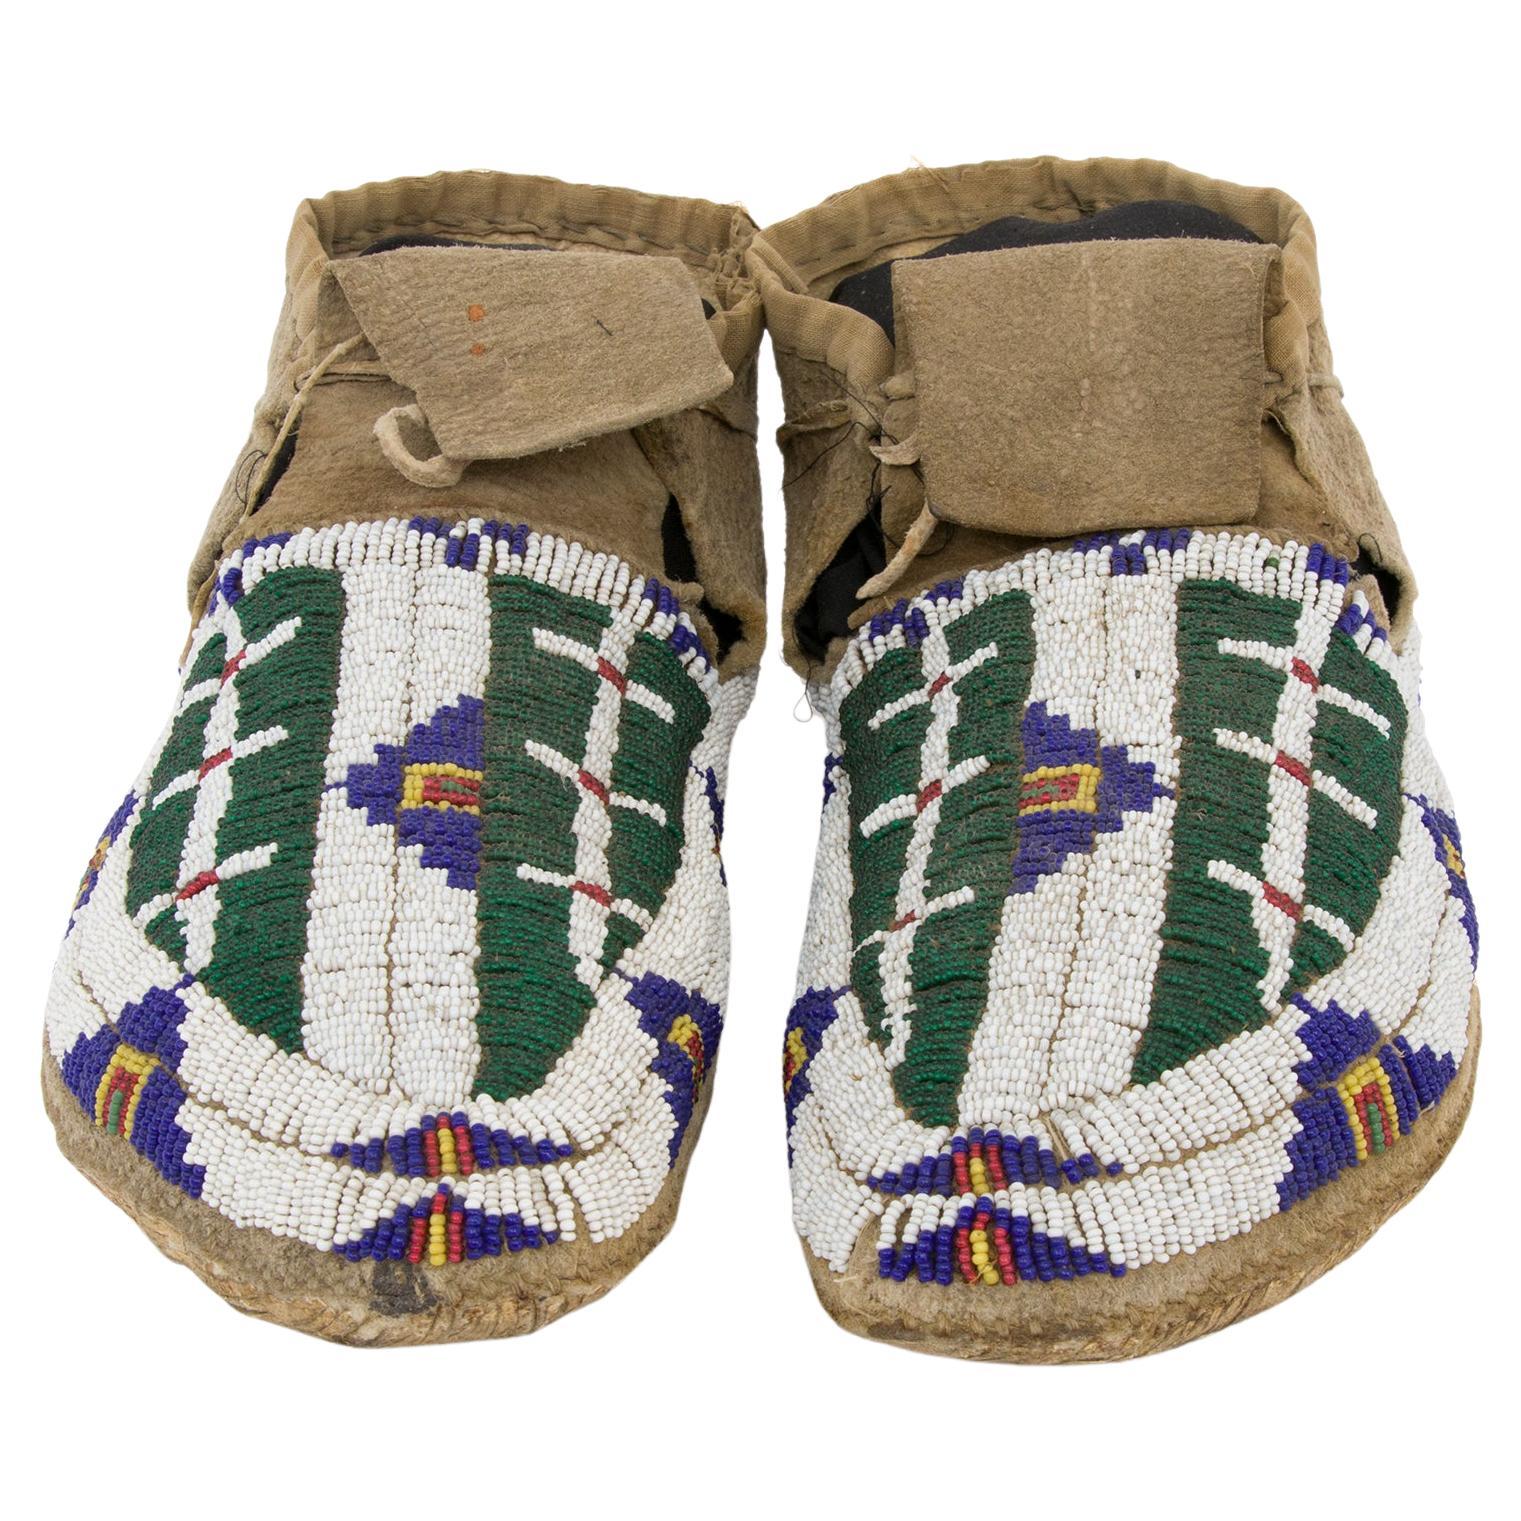 1880s Arapaho Moccasins Made of Native Tanned Hide with Glass Trade Beads 